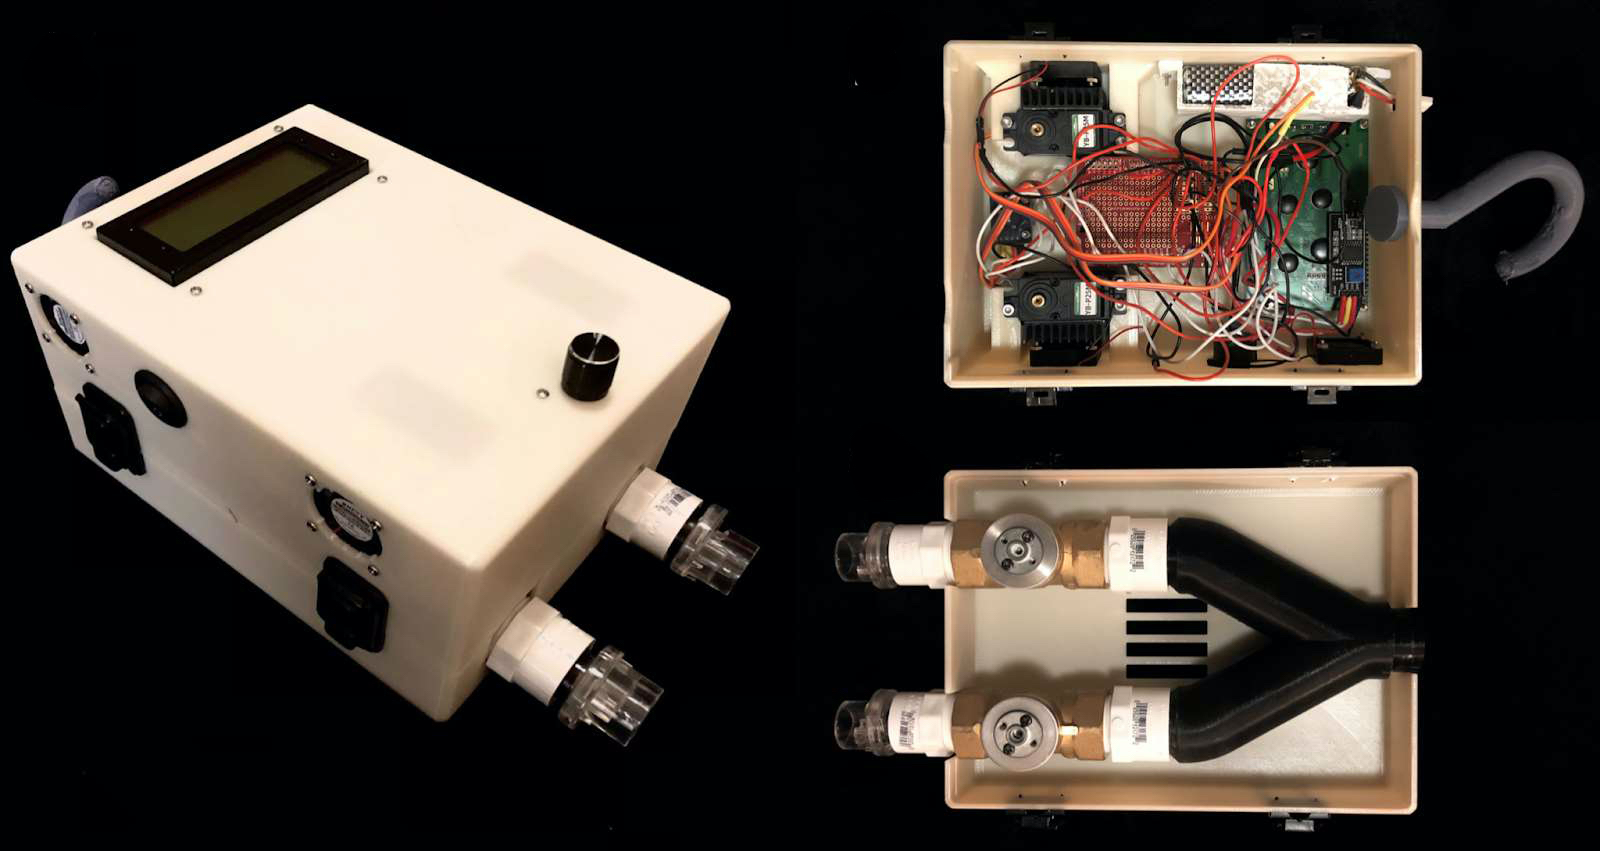 A photo of, on the left, the exterior of the finished Eucovent prototype and, on the right an opened device on the right that shows the internal electronic components, including motors, battery, microcontroller, LCD screen, cooling hardware, splitter, ball valves to control resistance, PVC connectors, and unidirectional valves to prevent backflow of air.